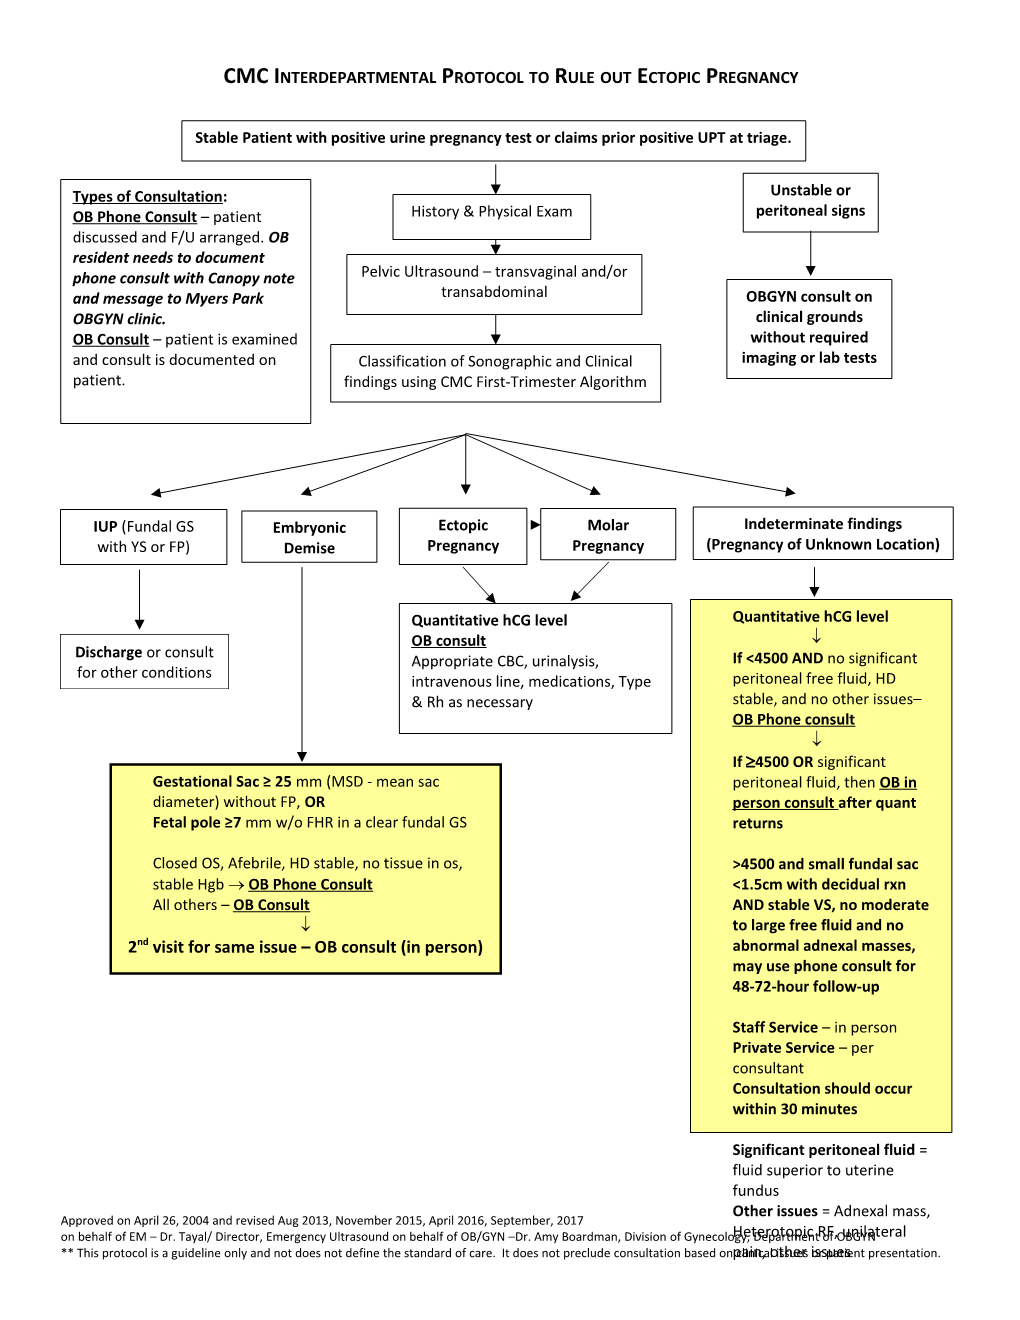 Figure 1 CMC Interdepartmental Protocol to Rule out Ectopic Pregnancy